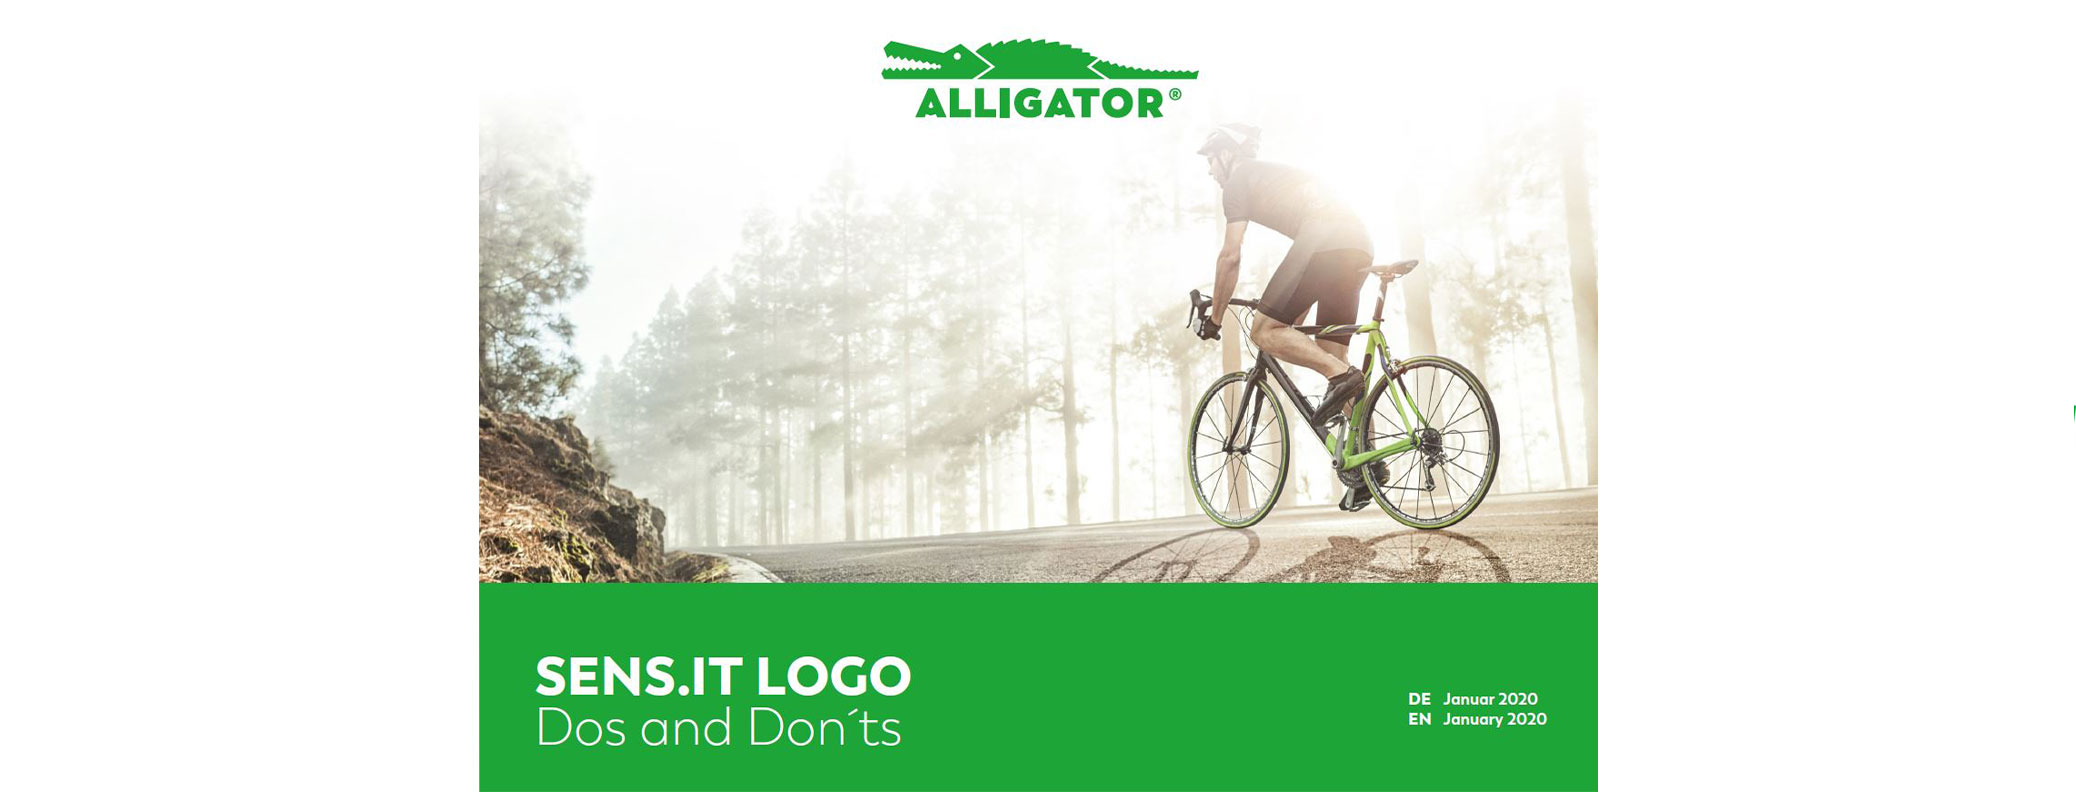 ALLIGATOR design and logo with cyclist as background